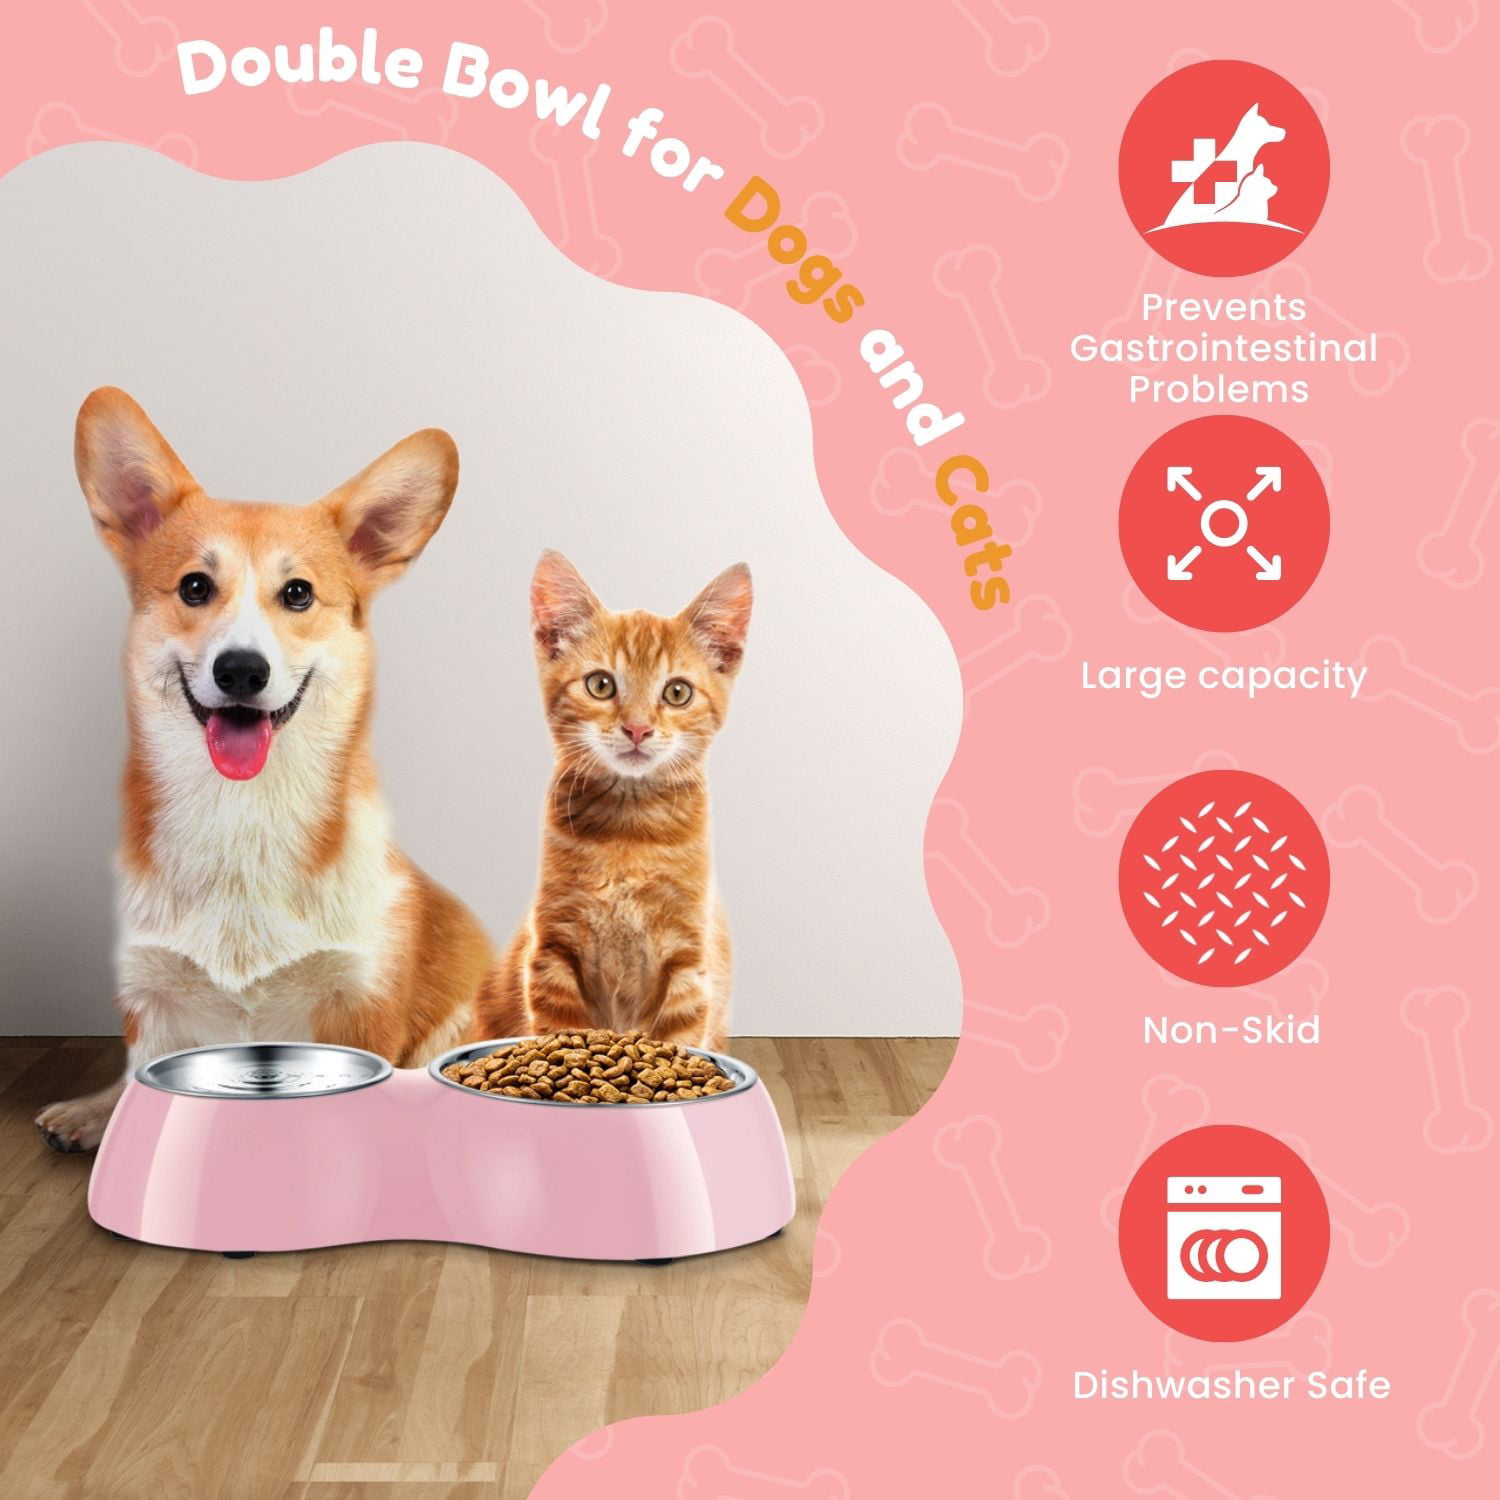 EveryYay Better Together Pink Silicone Double Diner with Stainless-Steel  Bowls for Dogs, 2 Cups